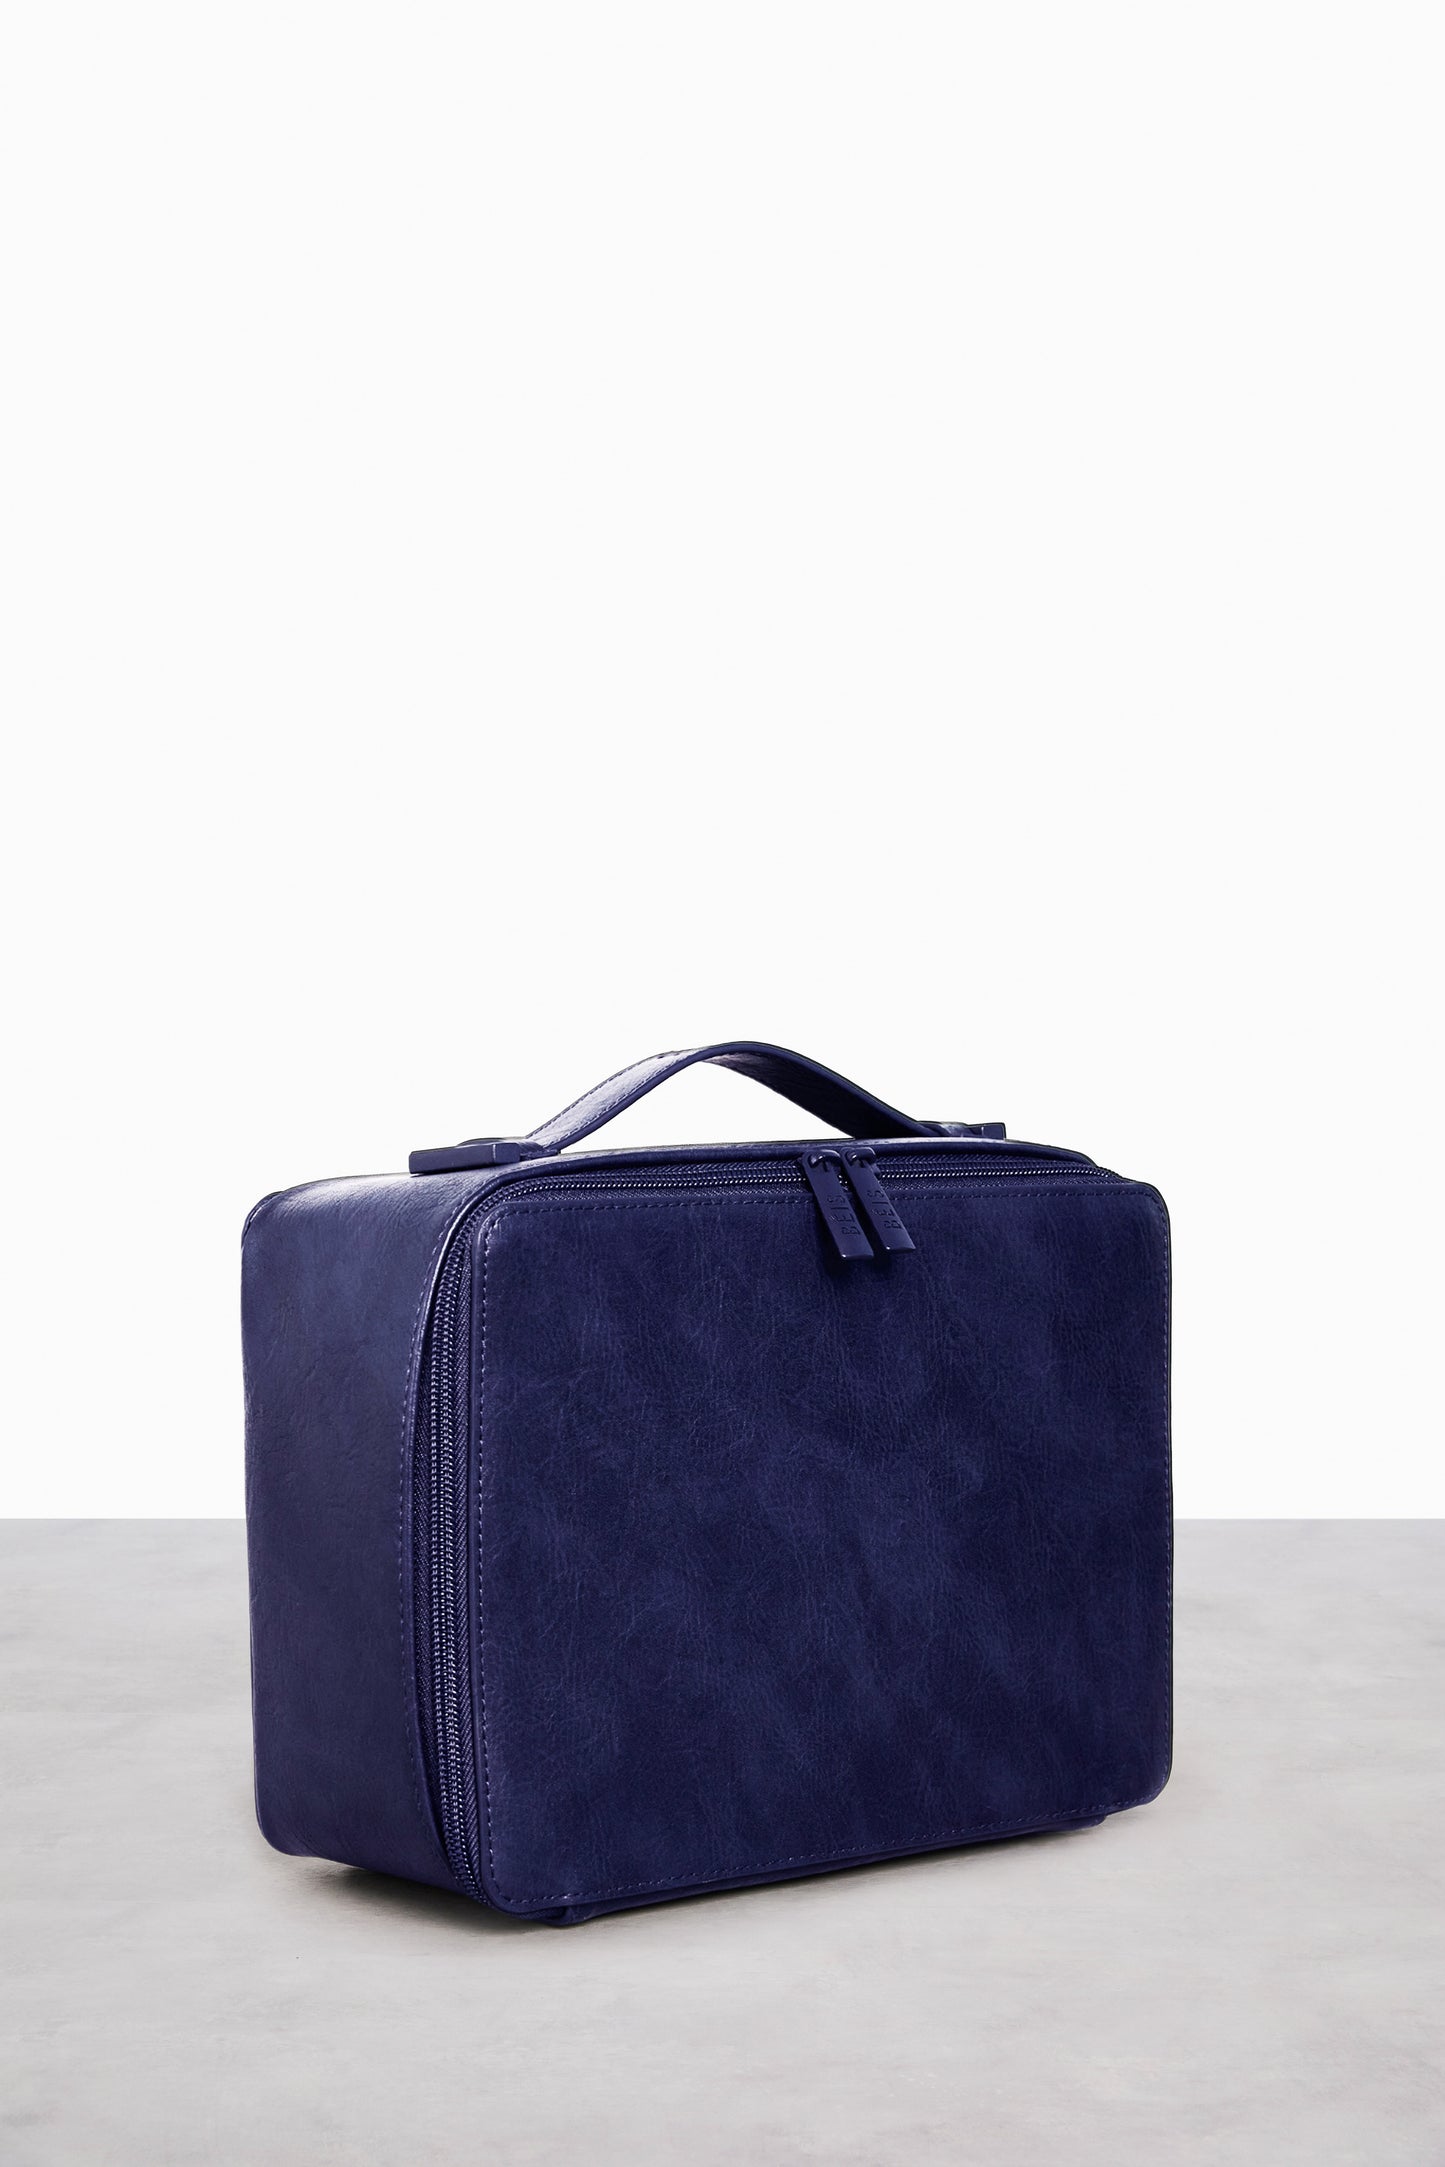 The Cosmetic Case in Navy